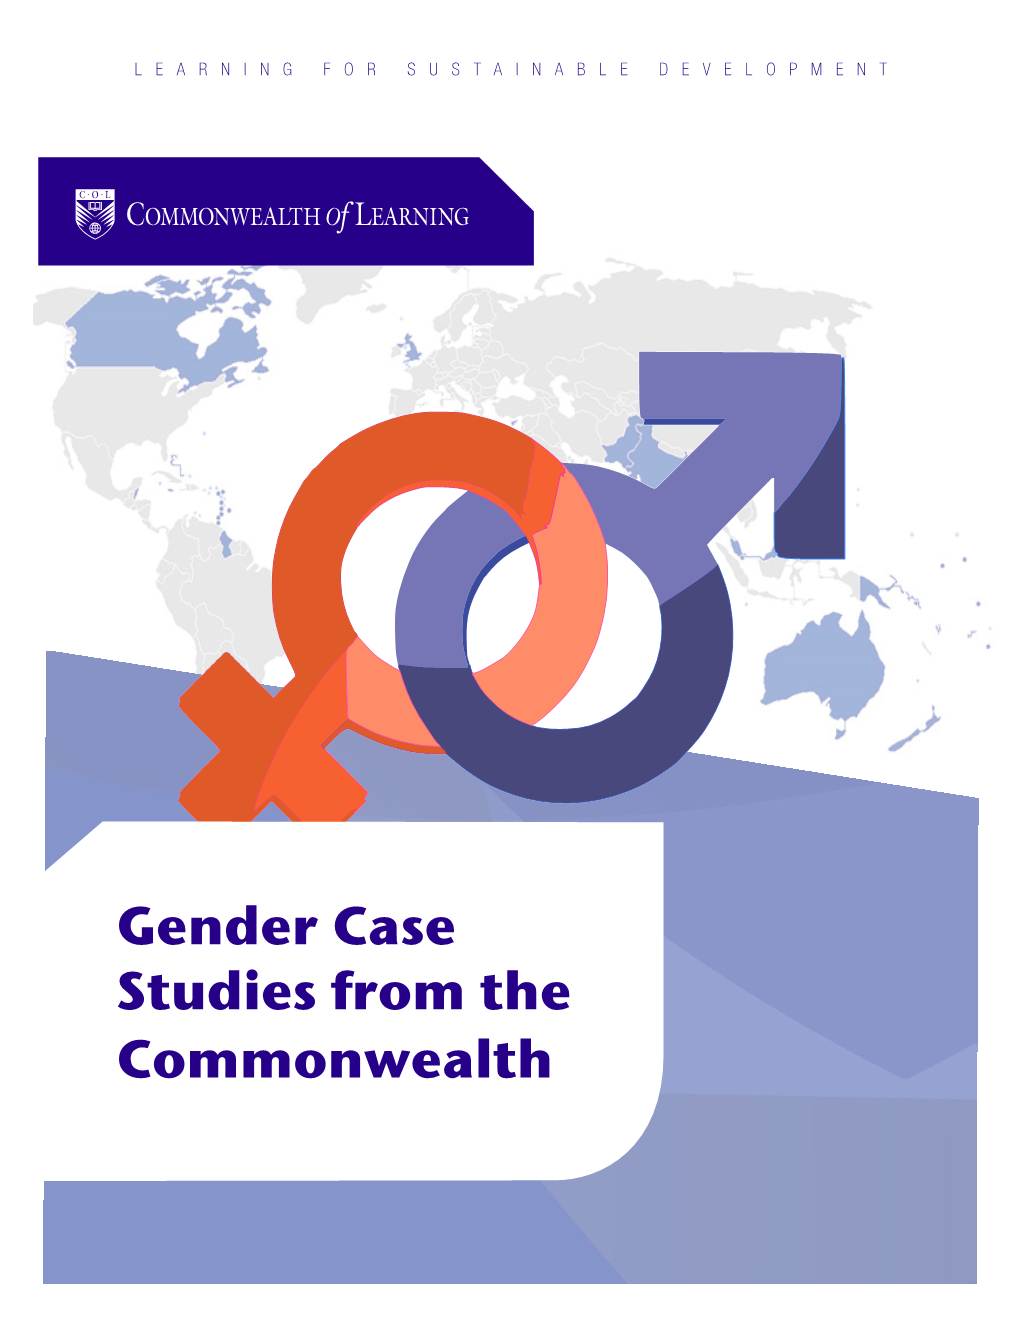 Gender Case Studies from the Commonwealth